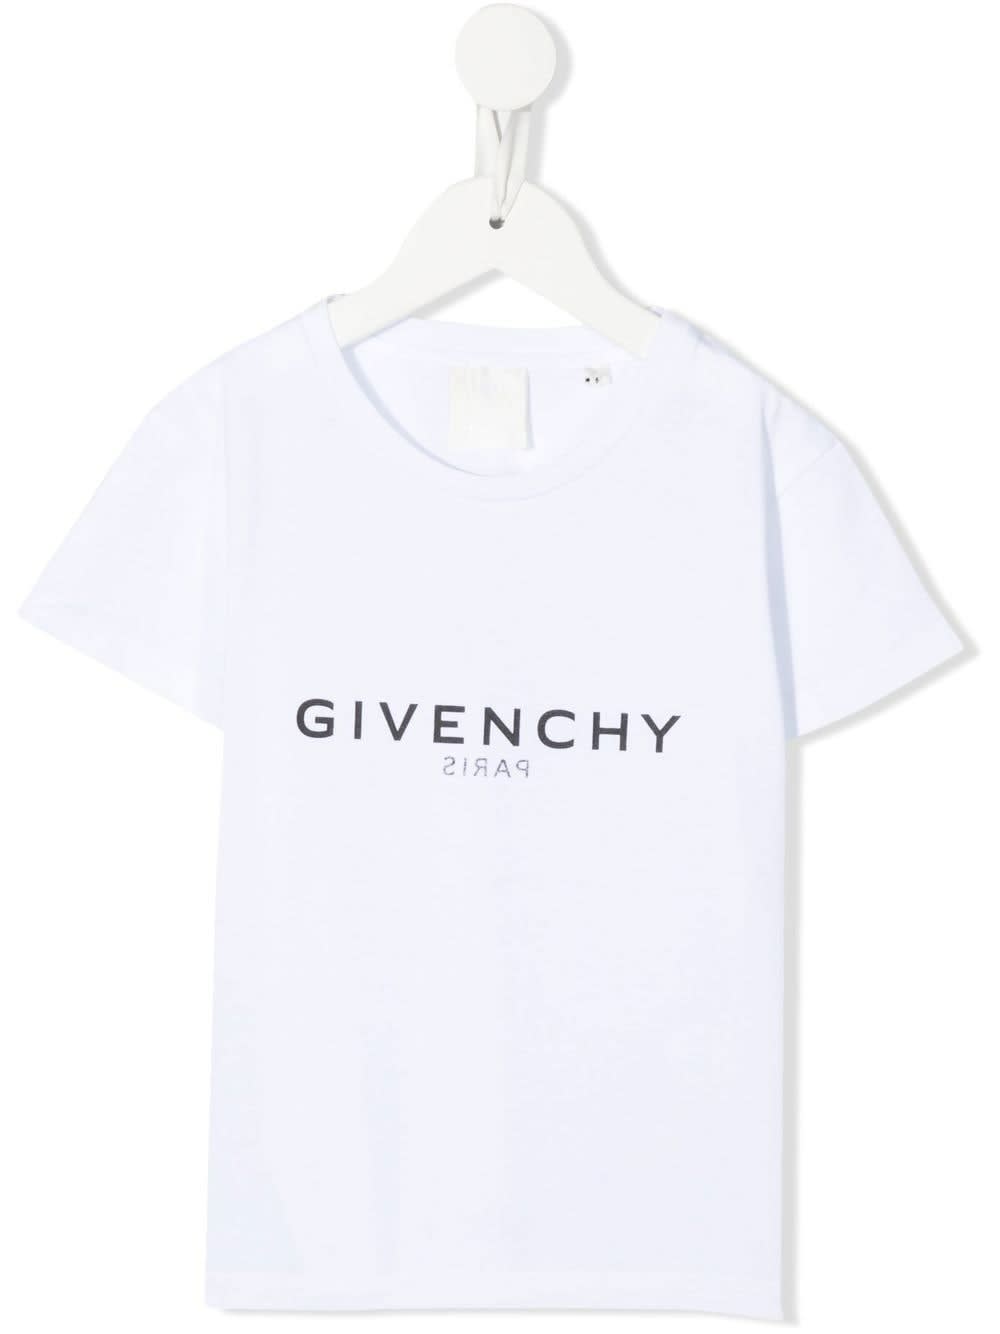 GIVENCHY GIRL WHITE GIVENCHY REVERSE T-SHIRT